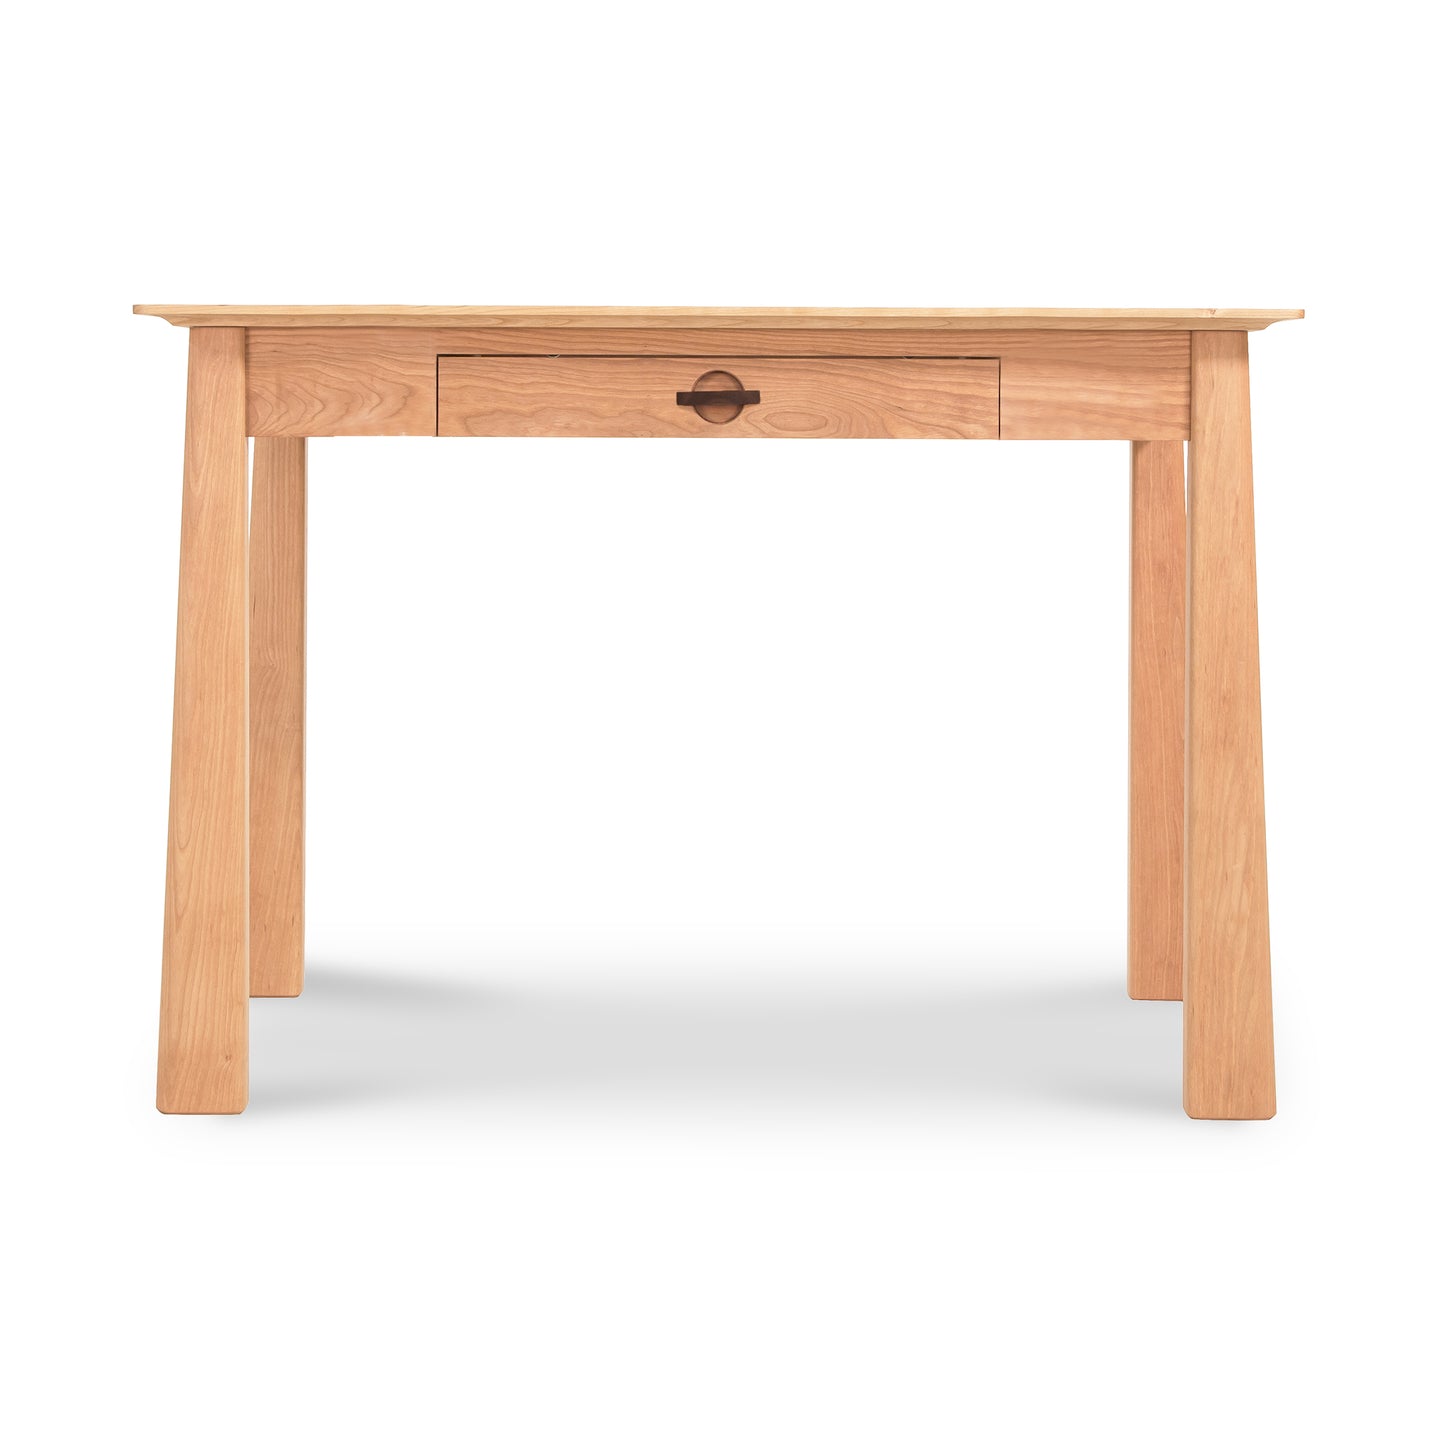 An eco-friendly Cherry Moon Writing Desk made by Maple Corner Woodworks with a drawer on top.